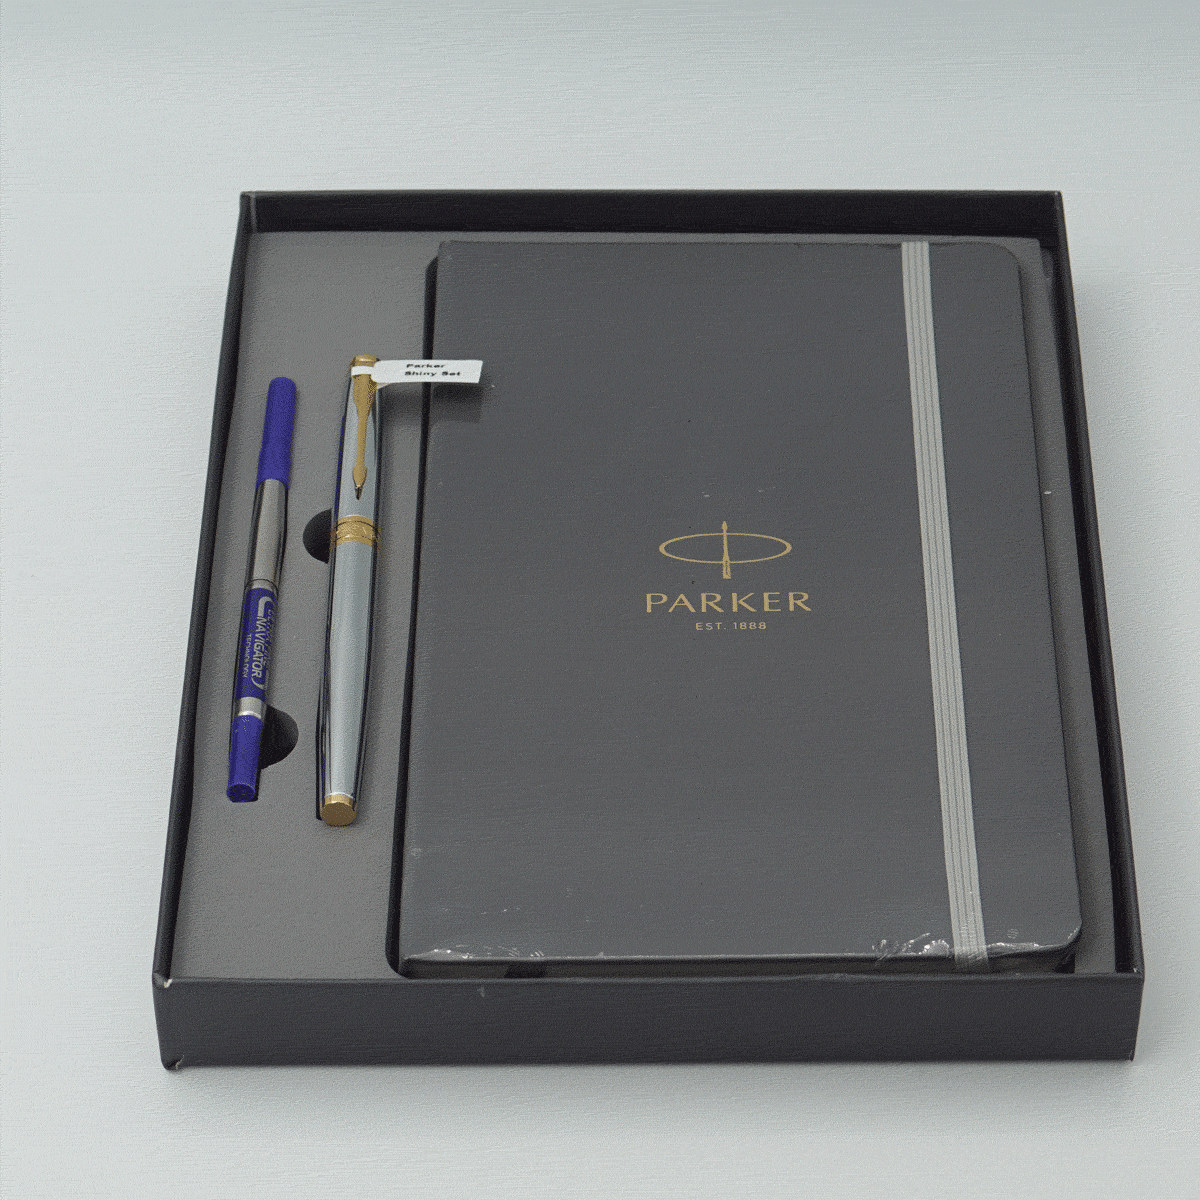 Parker Aster Shiny Silver Color Body With Gold Clip Ultra Fine Tip Roller Ball Pen With Diary Pen Set SKU 24195